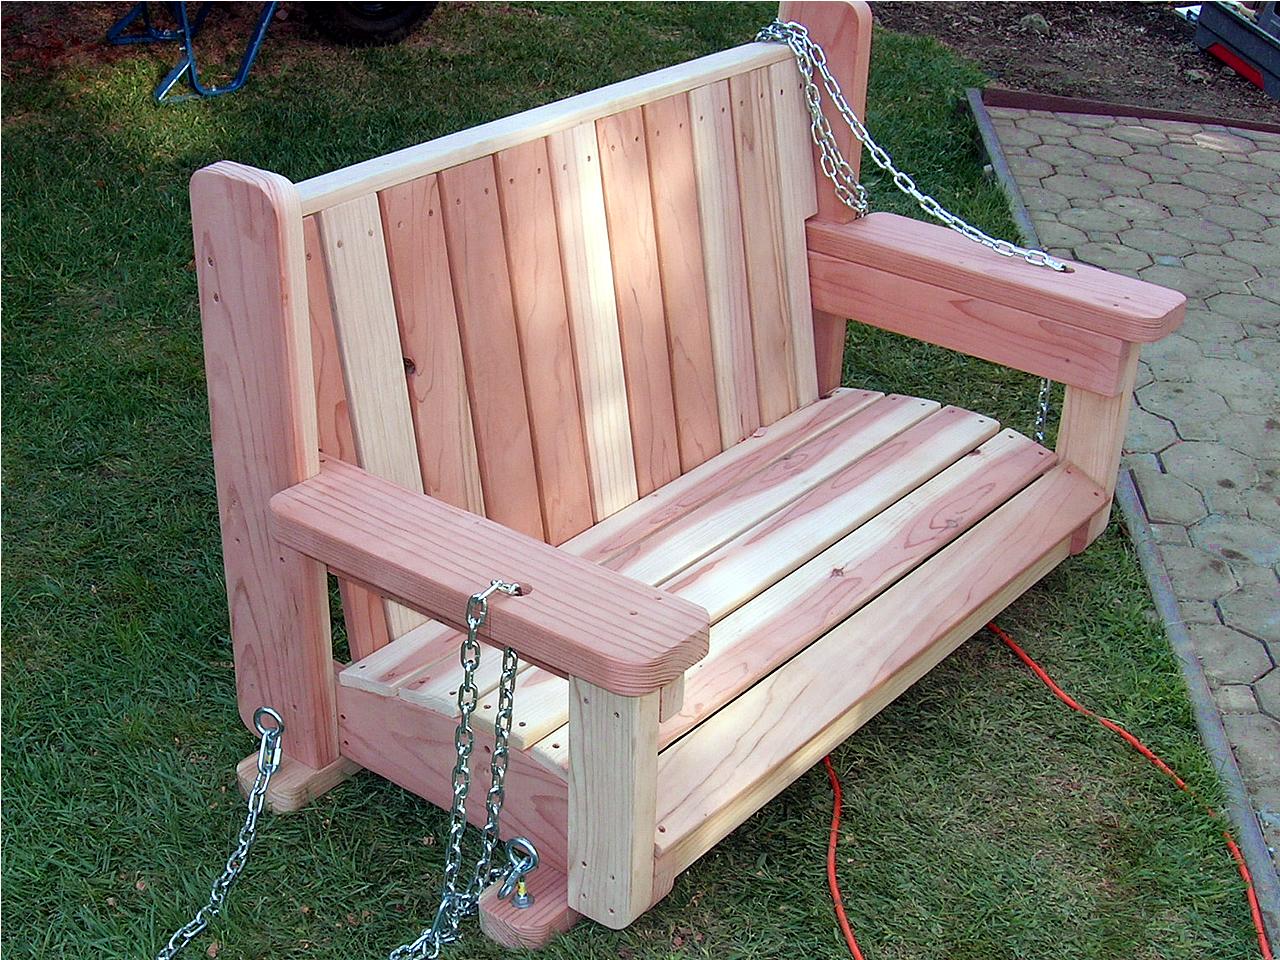 How To Build A Freestanding Arbor Swing Tos Diy - Wooden Patio Swing Set Plans